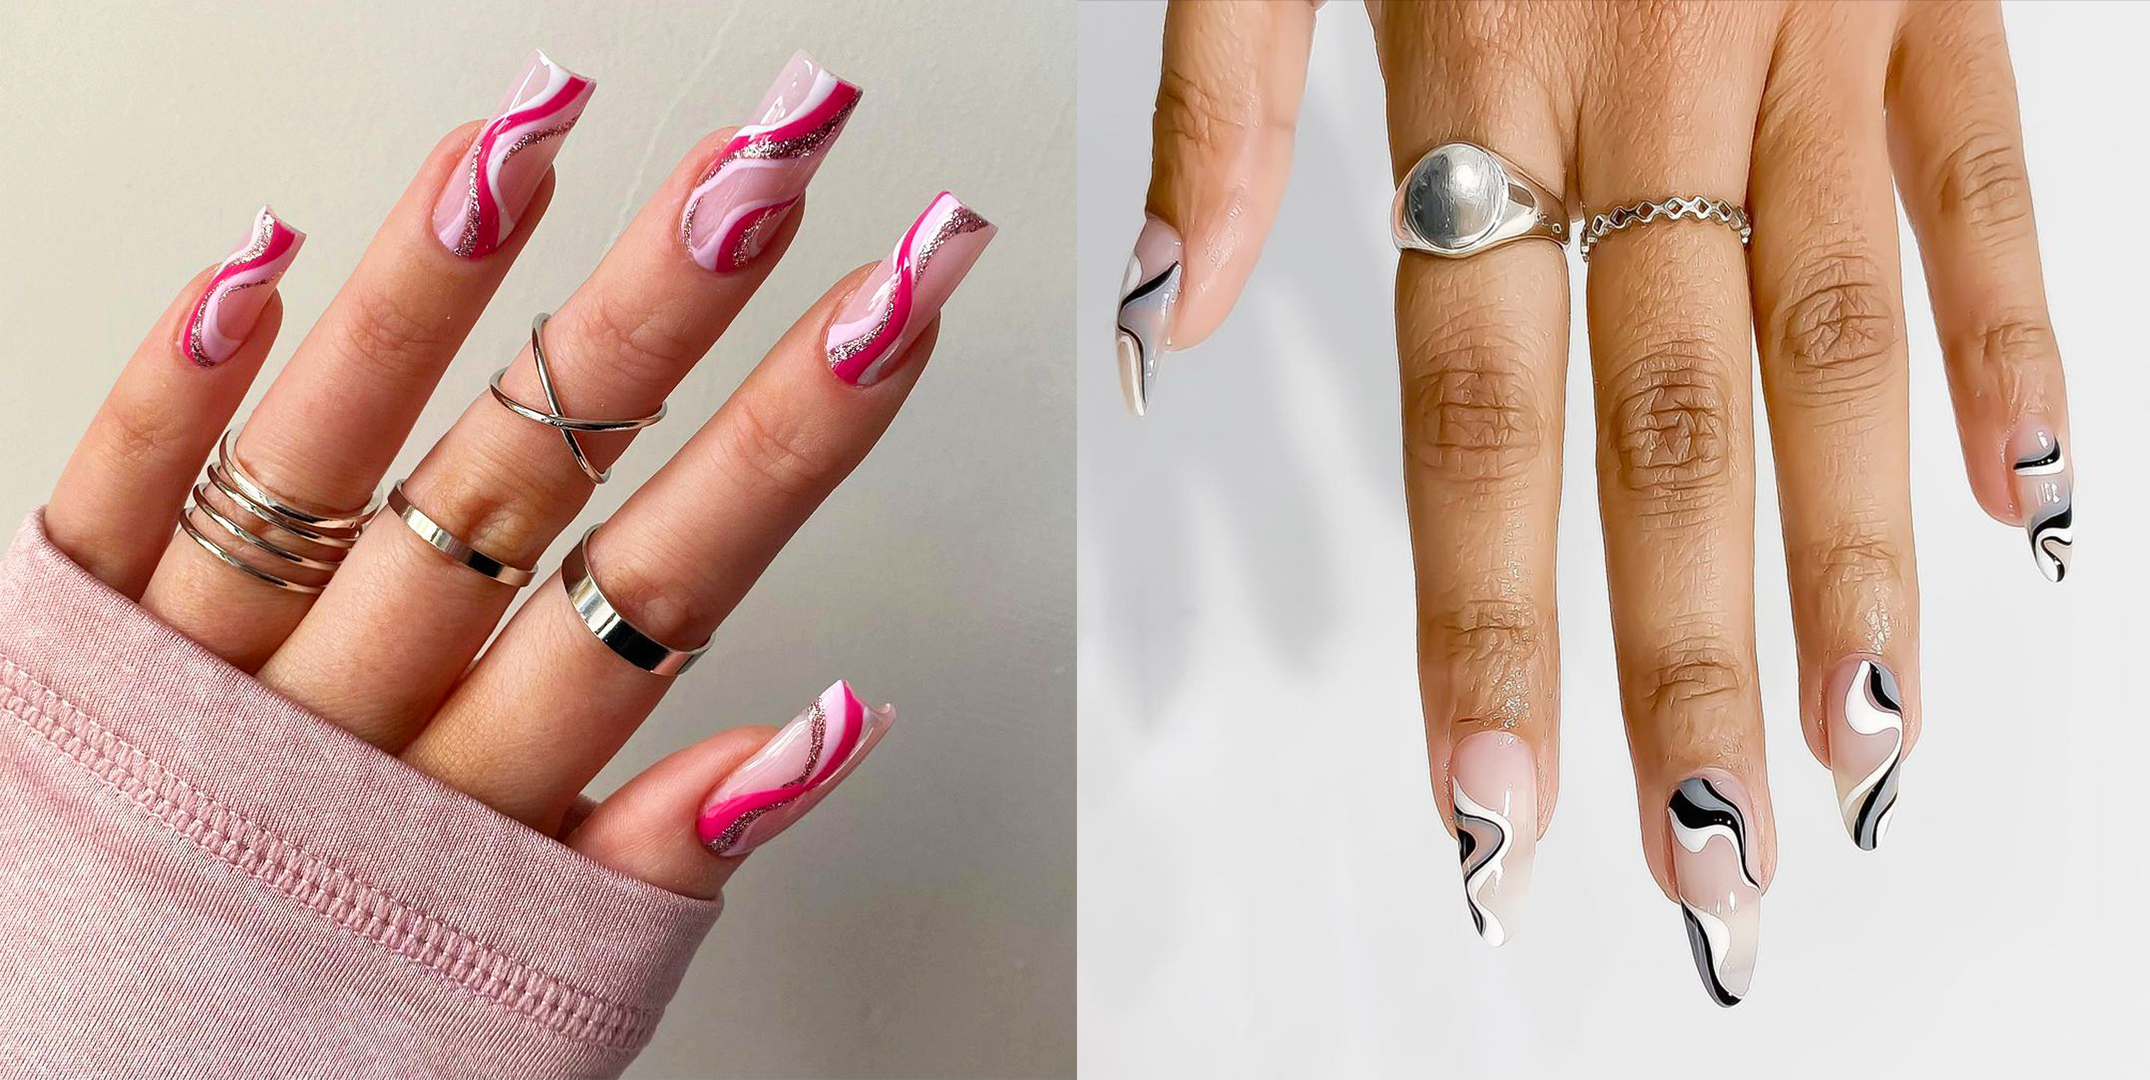 50+ Gorgeous White Nail Designs For All Occasions